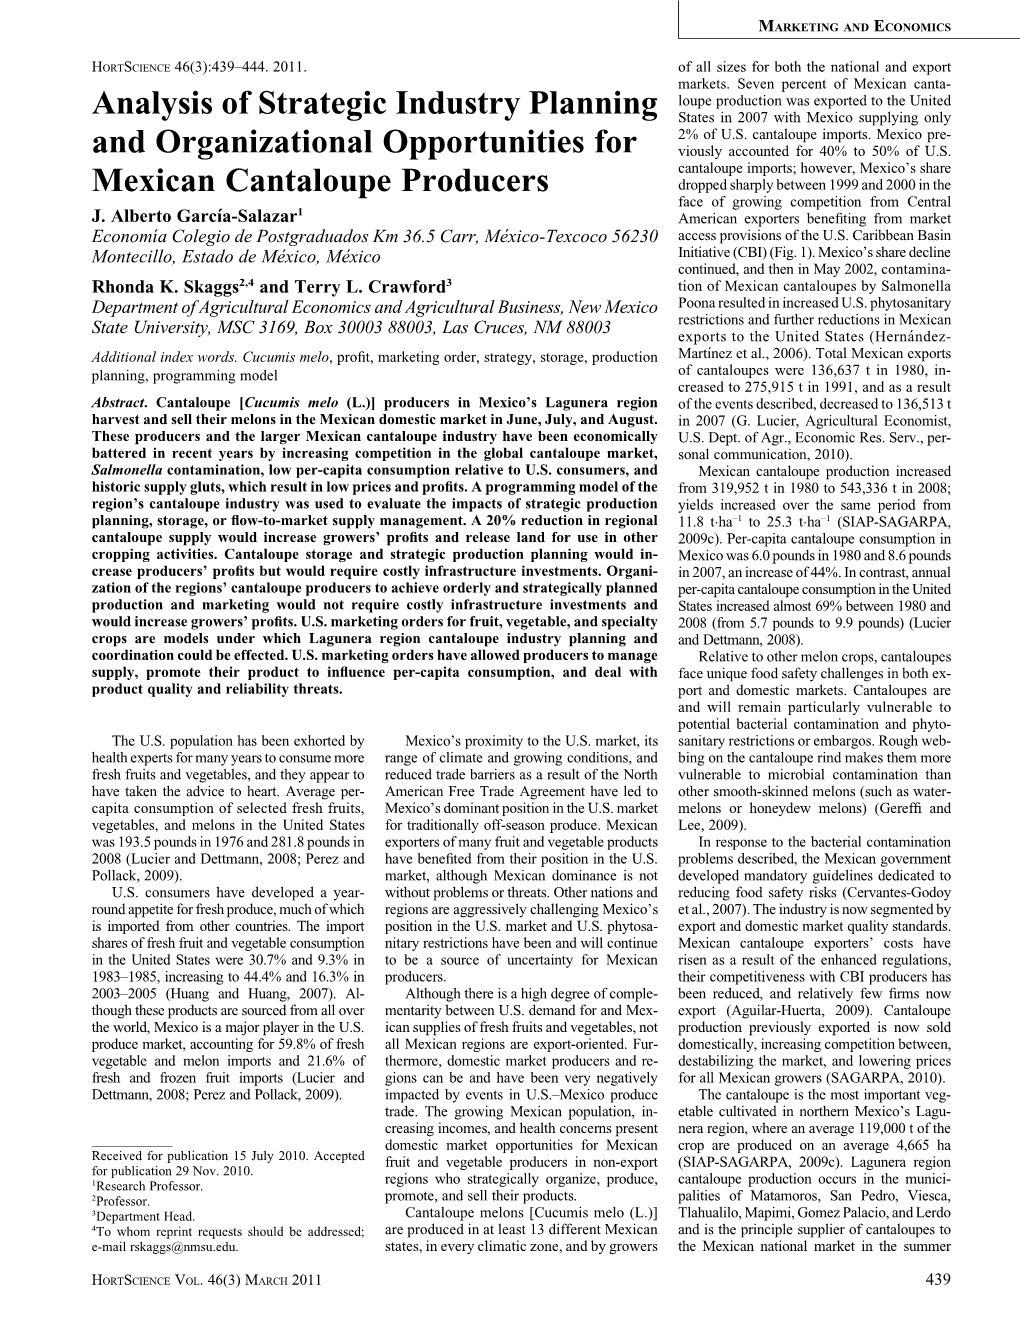 Analysis of Strategic Industry Planning and Organizational Opportunities for Mexican Cantaloupe Producers